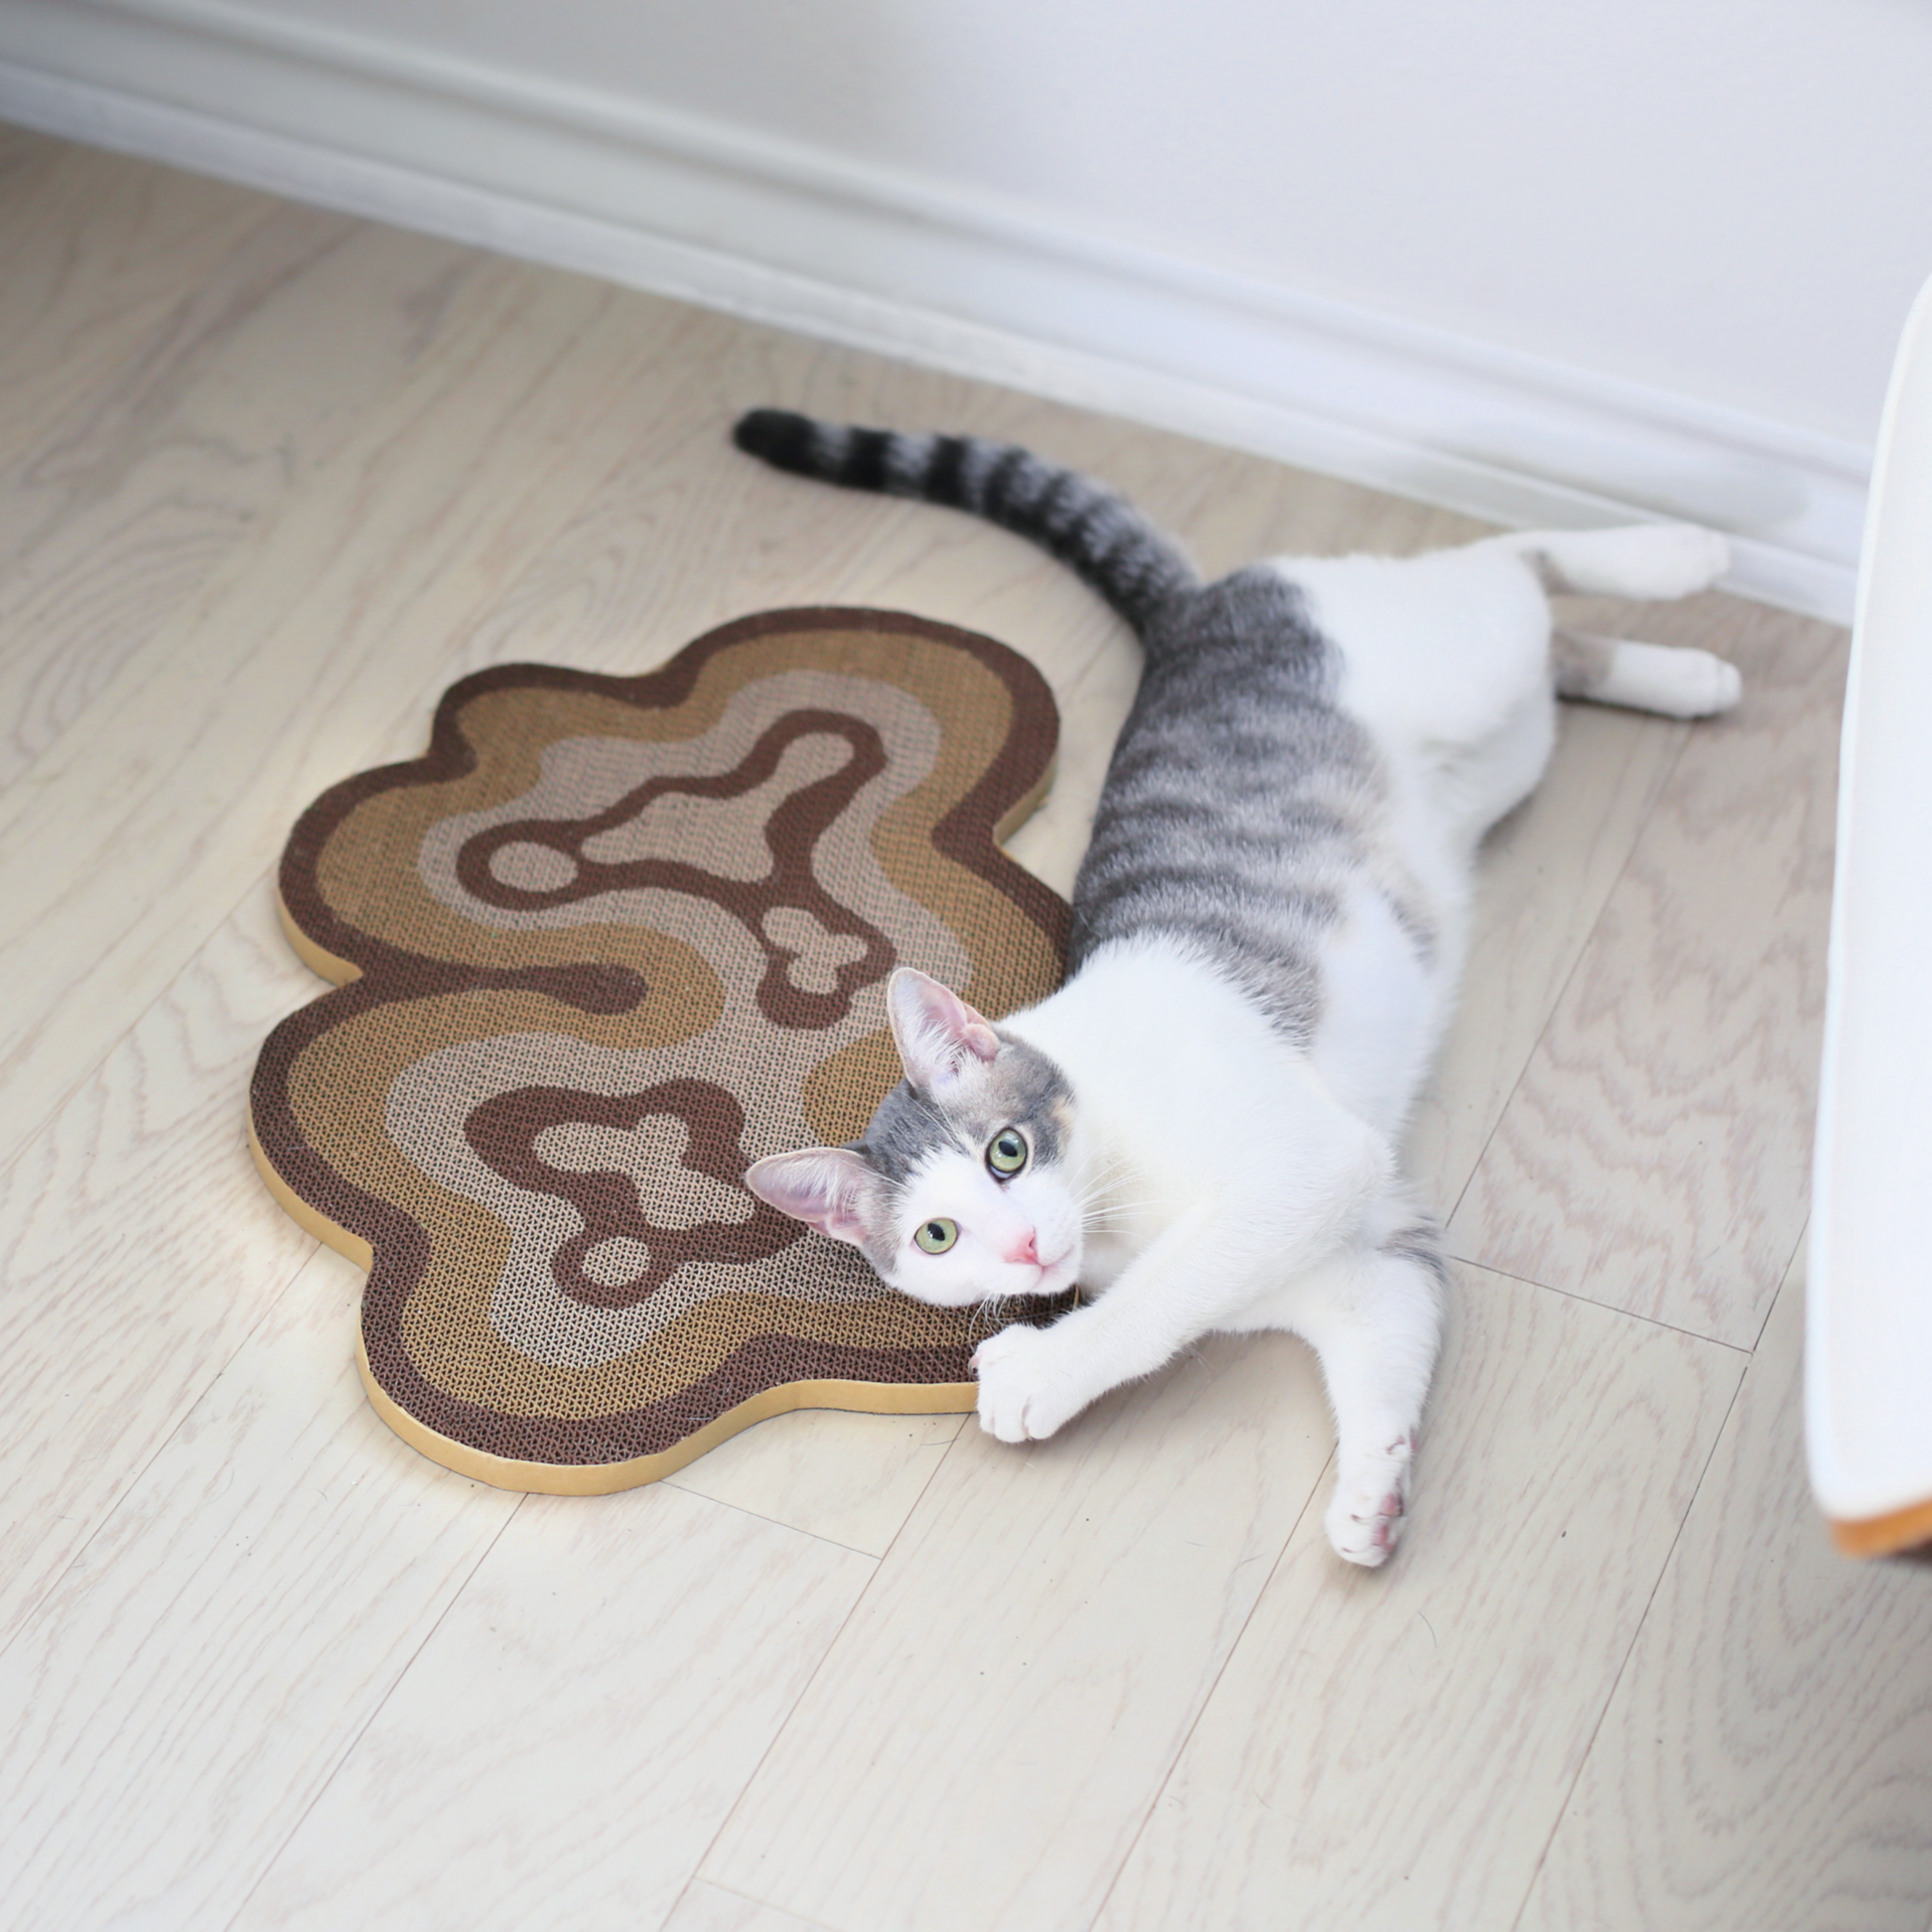 cat with catenary kitty scratching post and modern cat scratcher to prevent cats from scratching furniture that is cardboard cat scratcher